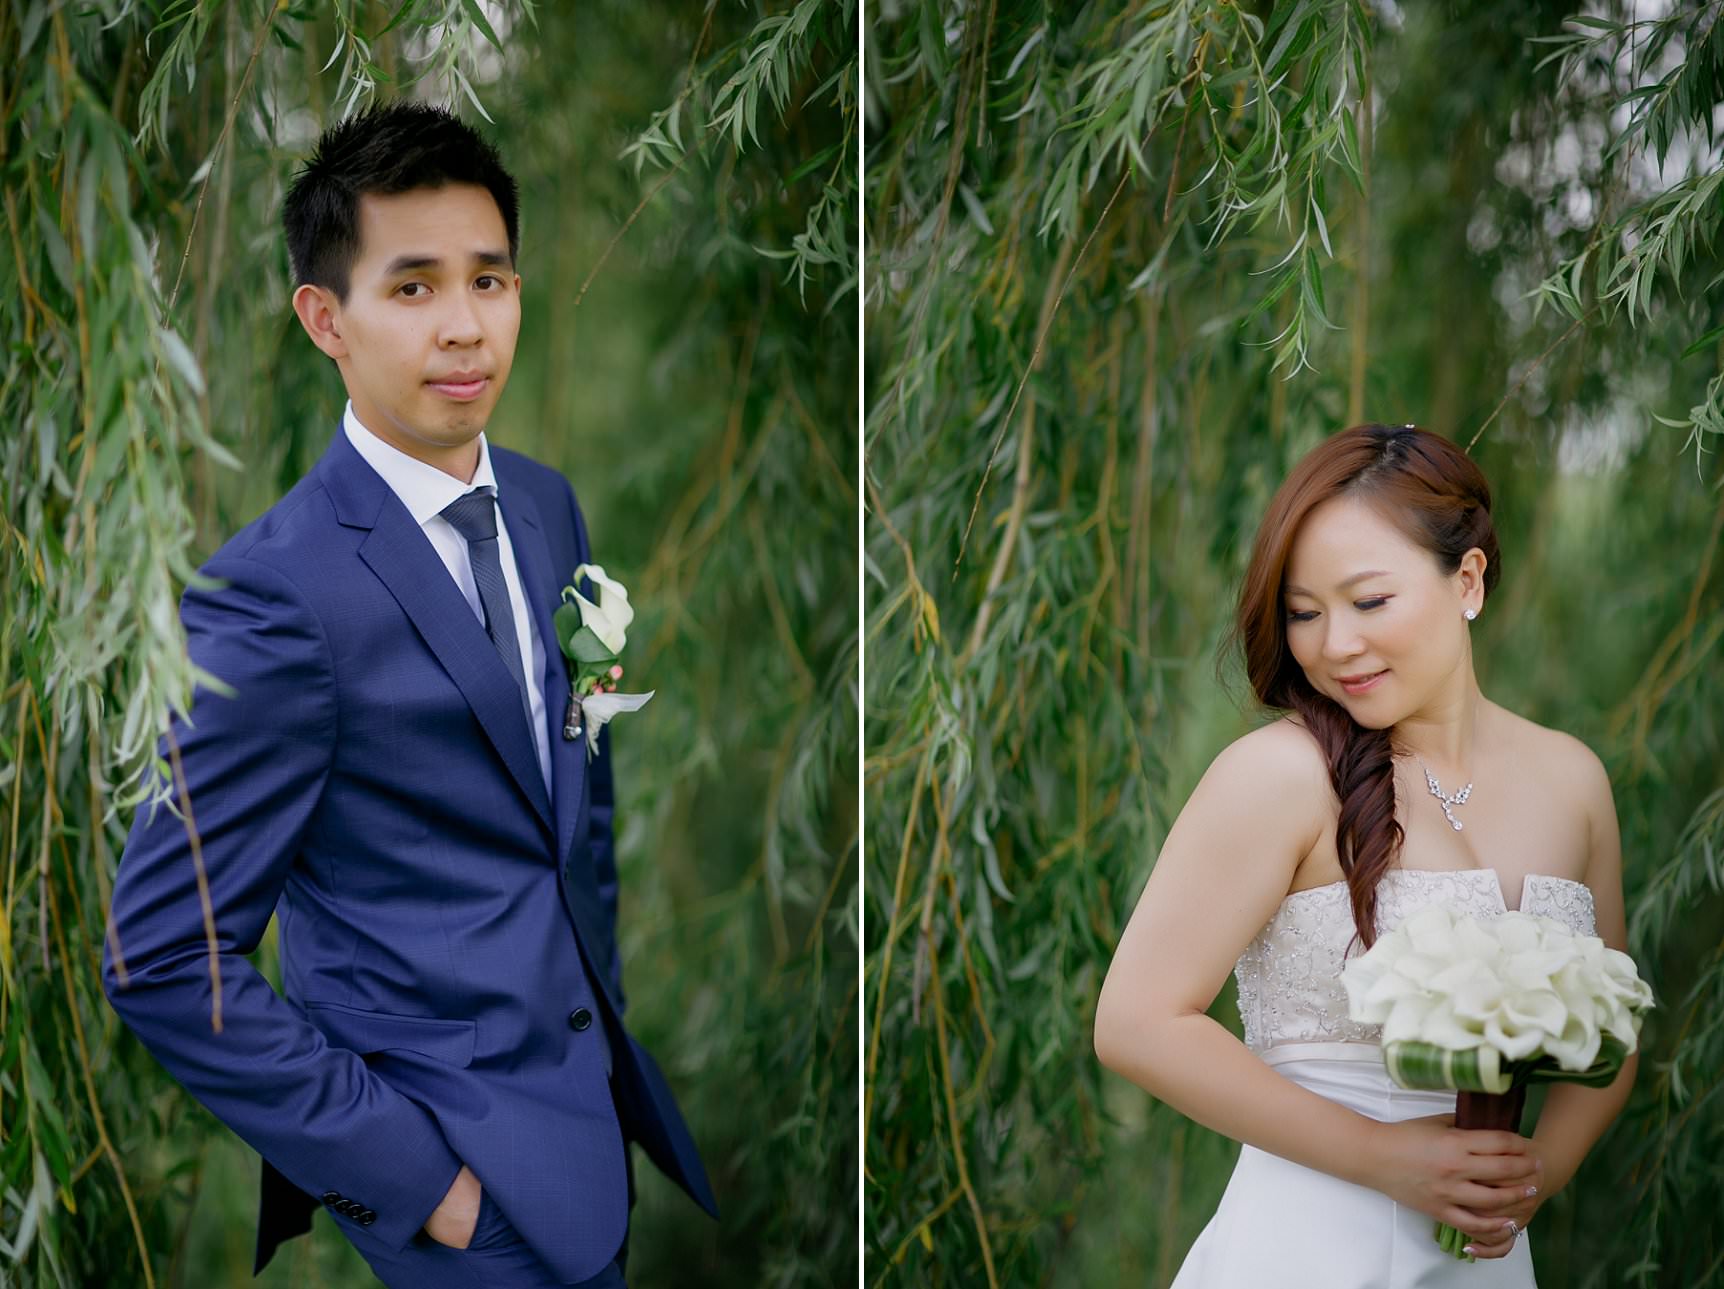 Beautiful portraits of the bride and groom under a willow tree.